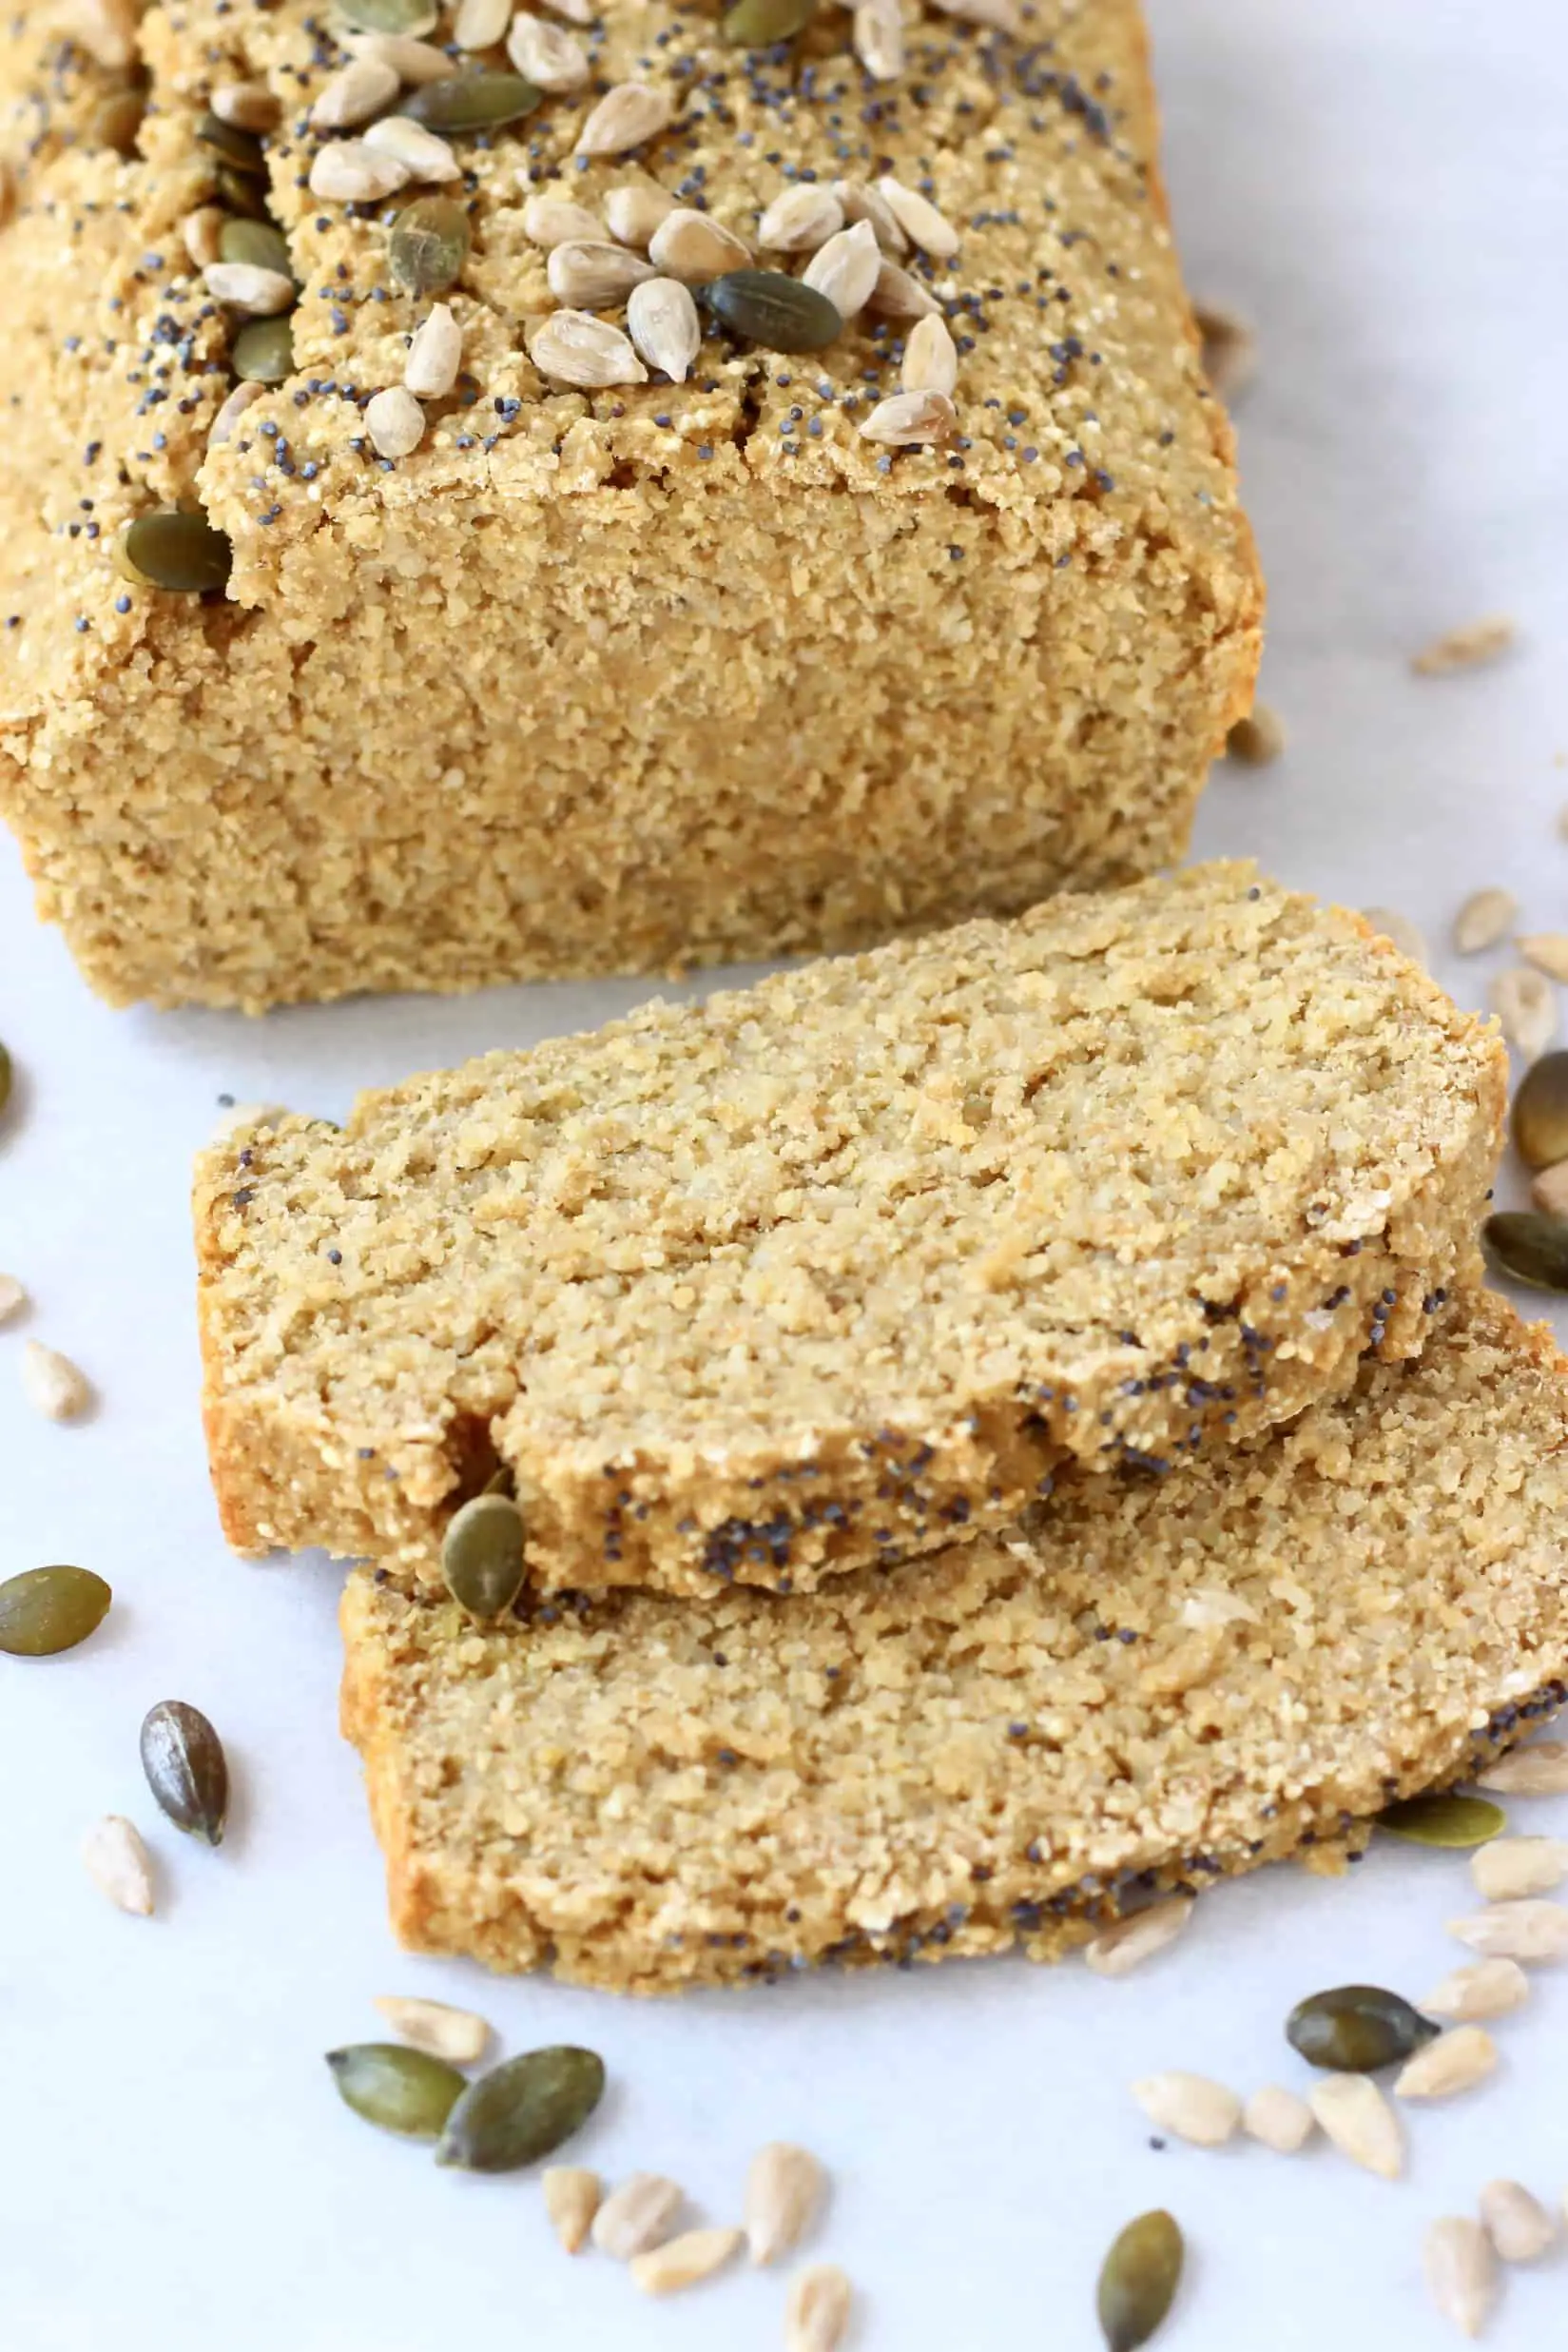 A loaf of quinoa bread topped with seeds with two slices next to it